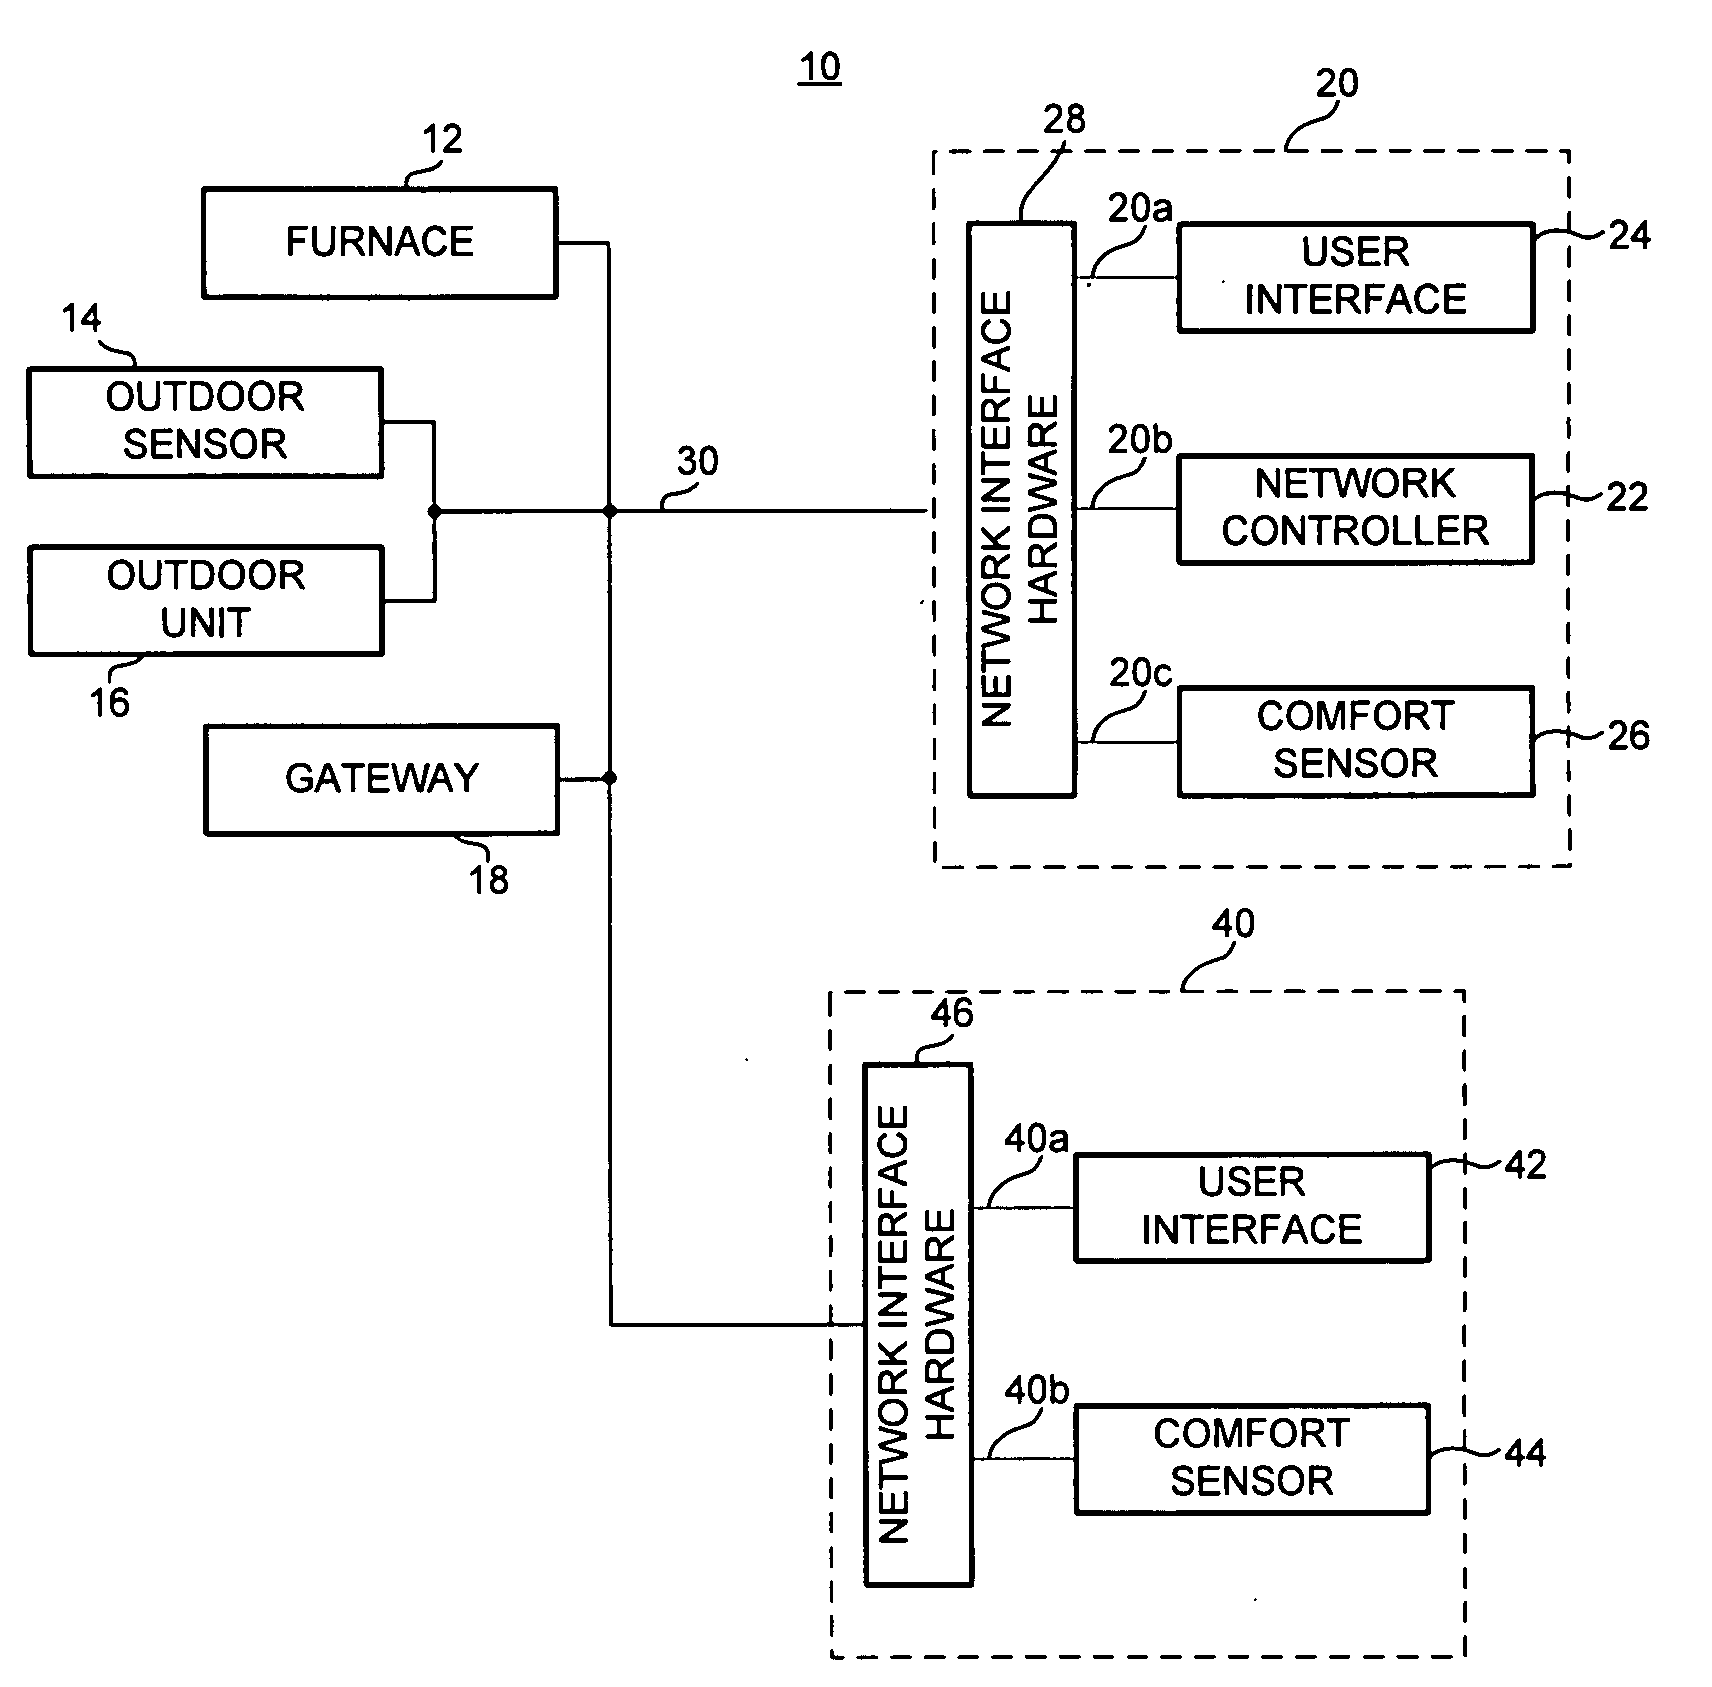 Apparatus and method for controlling an environmental conditioning system